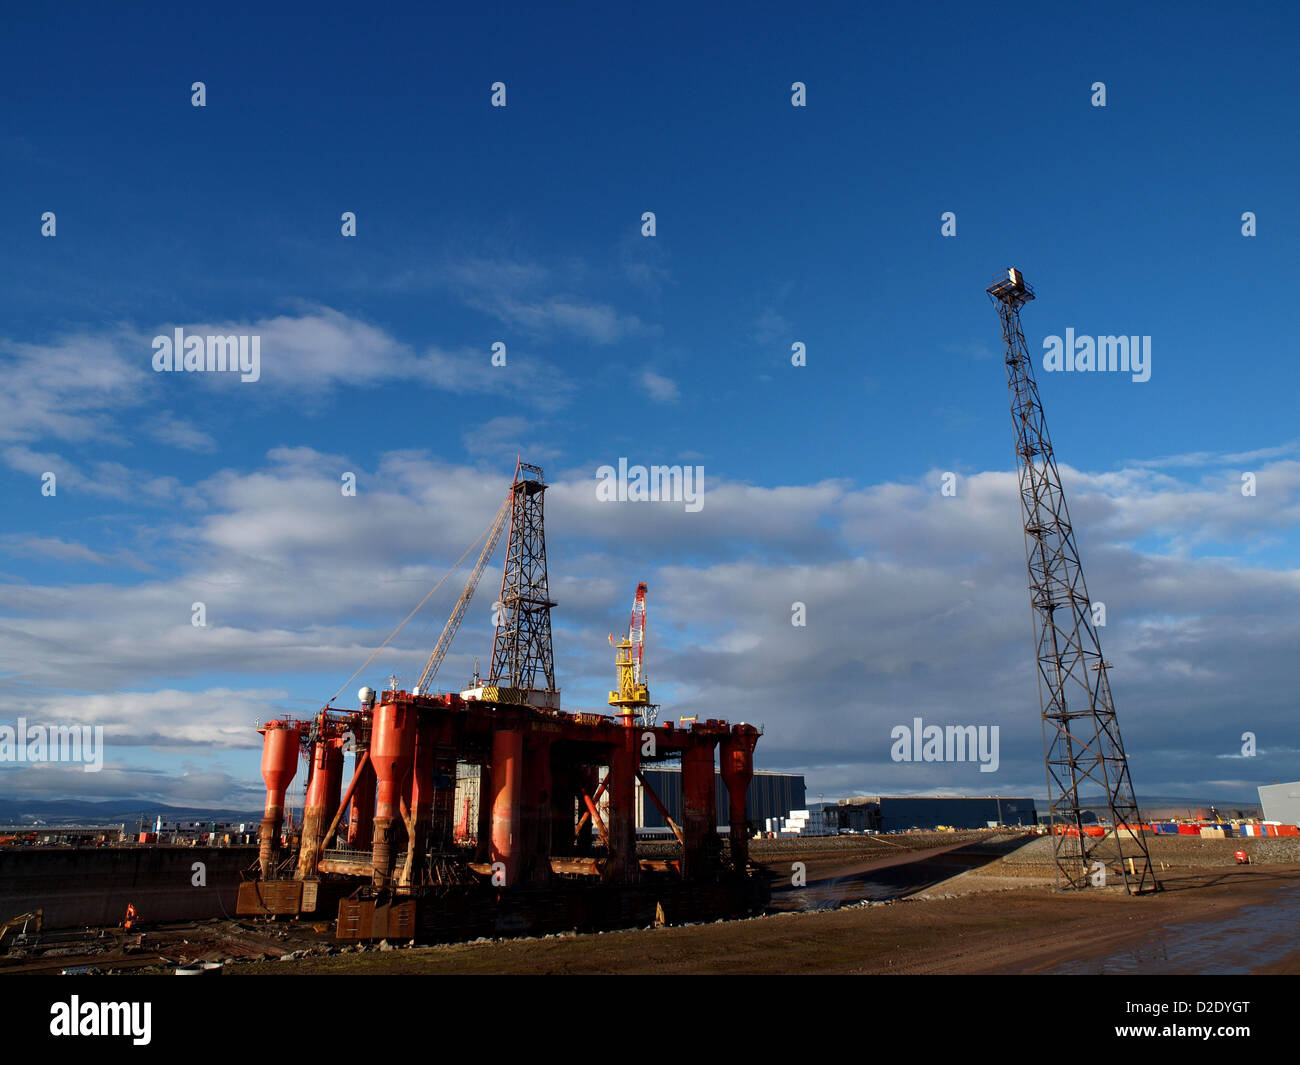 The Oil Rig Borgston Dolphin in the Dry Dock at the Nigg Energy Park, Cromarty Firth, Scotland Stock Photo